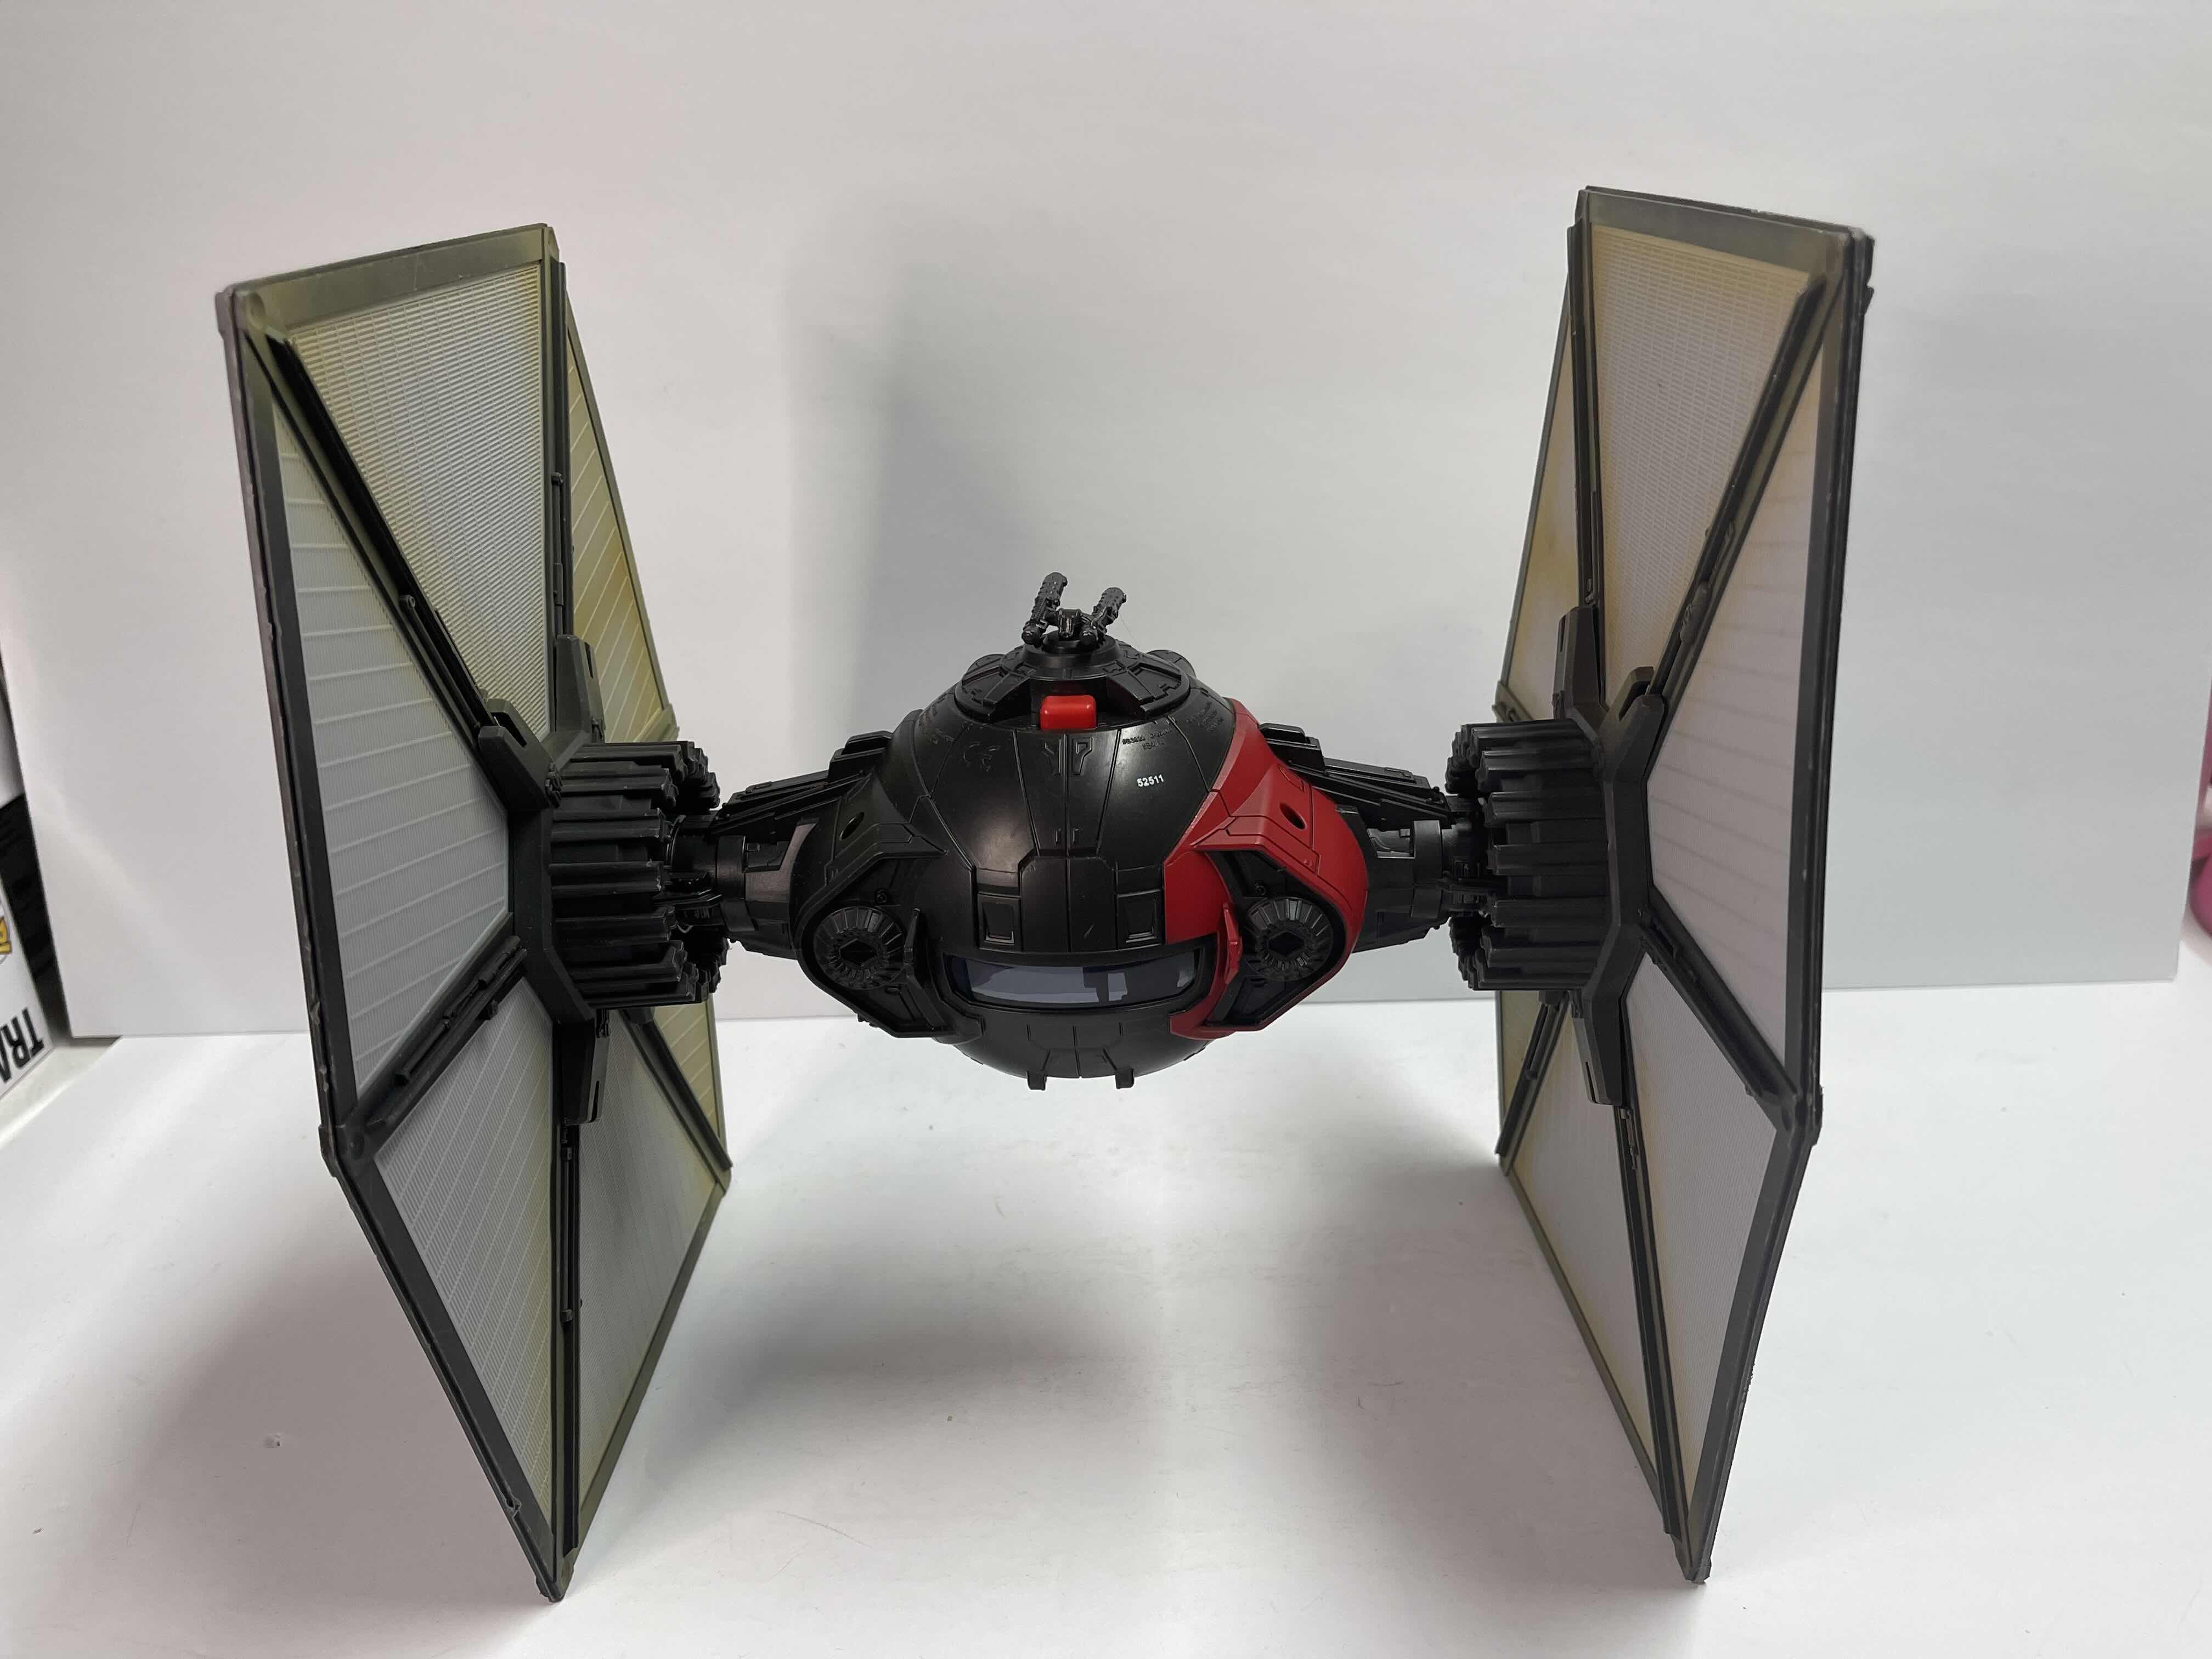 Photo 2 of 2015 HASBRO STAR WARS FIRST ORDER SPECIAL FORCES TIE FIGHTER (3 3/4 VERSION) -RETAIL VALUE $50 - SEE NOTES